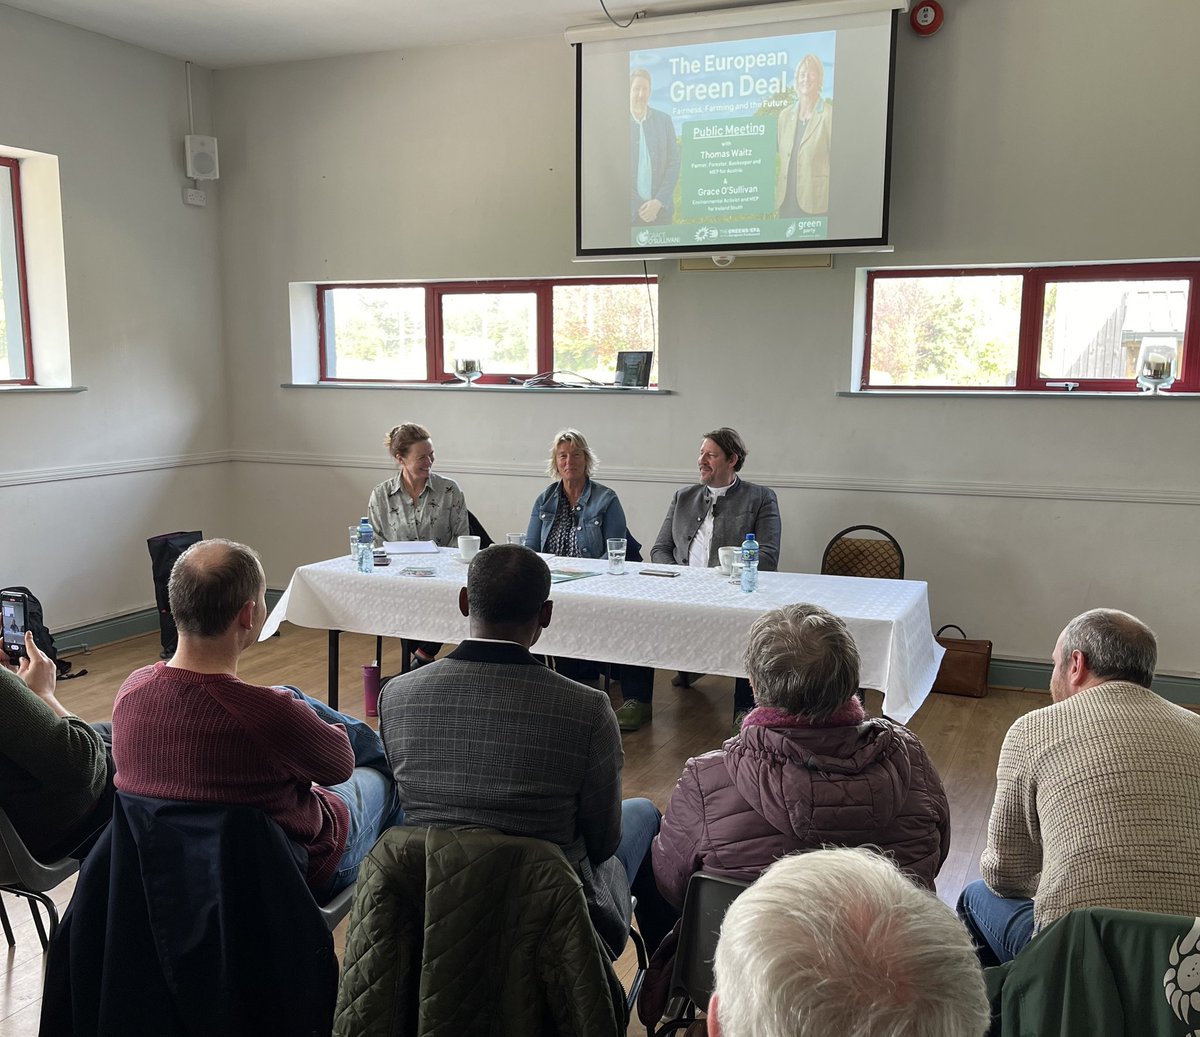 Farmers and Greens have more in common than most realise. The Greens are a leading force against the EU-Mercosur Trade Agreement in Europe, an environmentally-destructive trade deal which will undercut the livelihoods of farmers. Speaking today in Midleton with @thomaswaitz